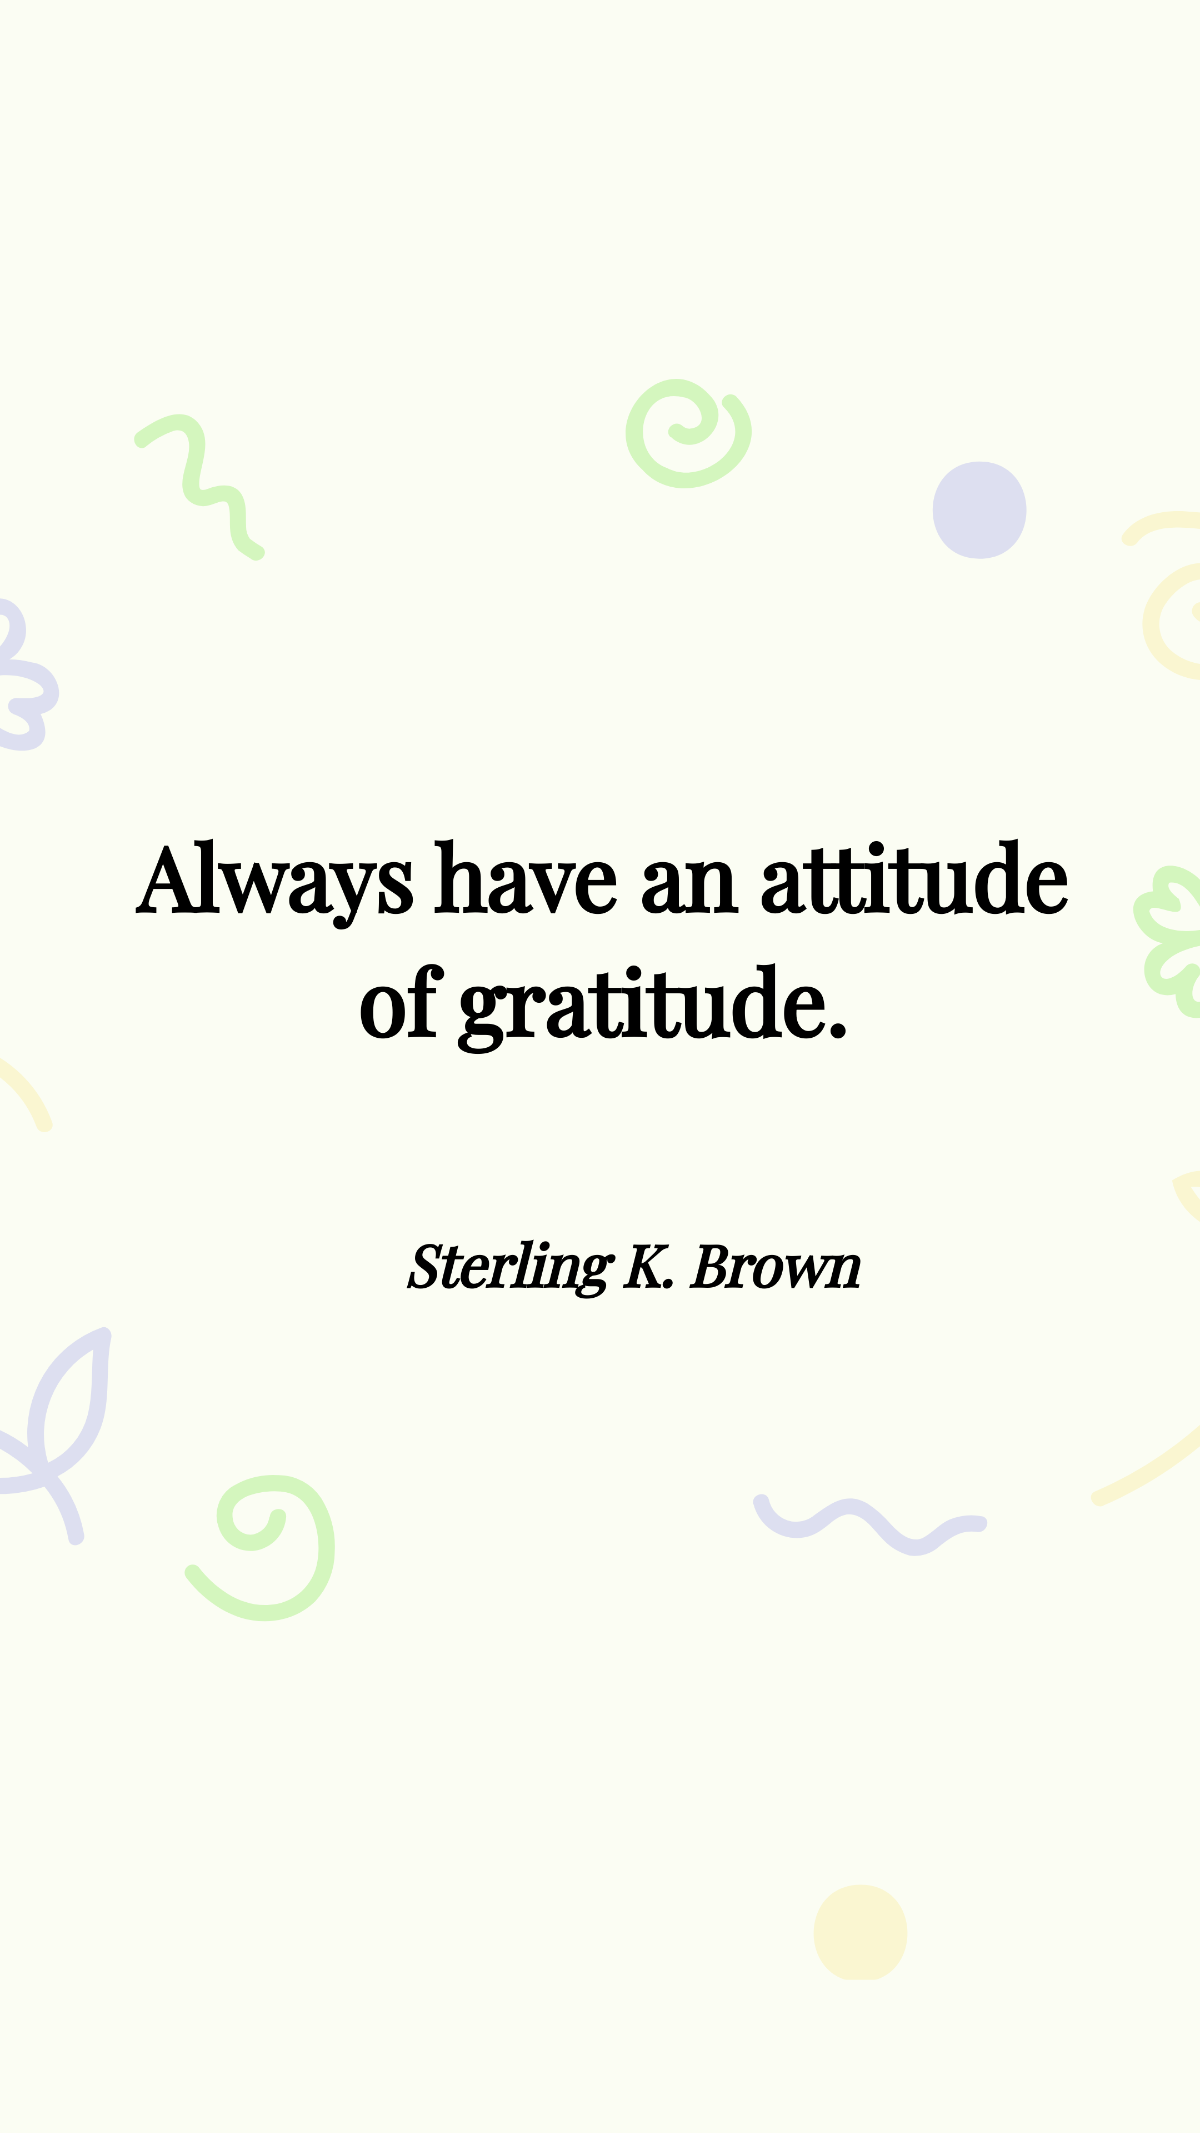 Sterling K. Brown - Always have an attitude of gratitude.